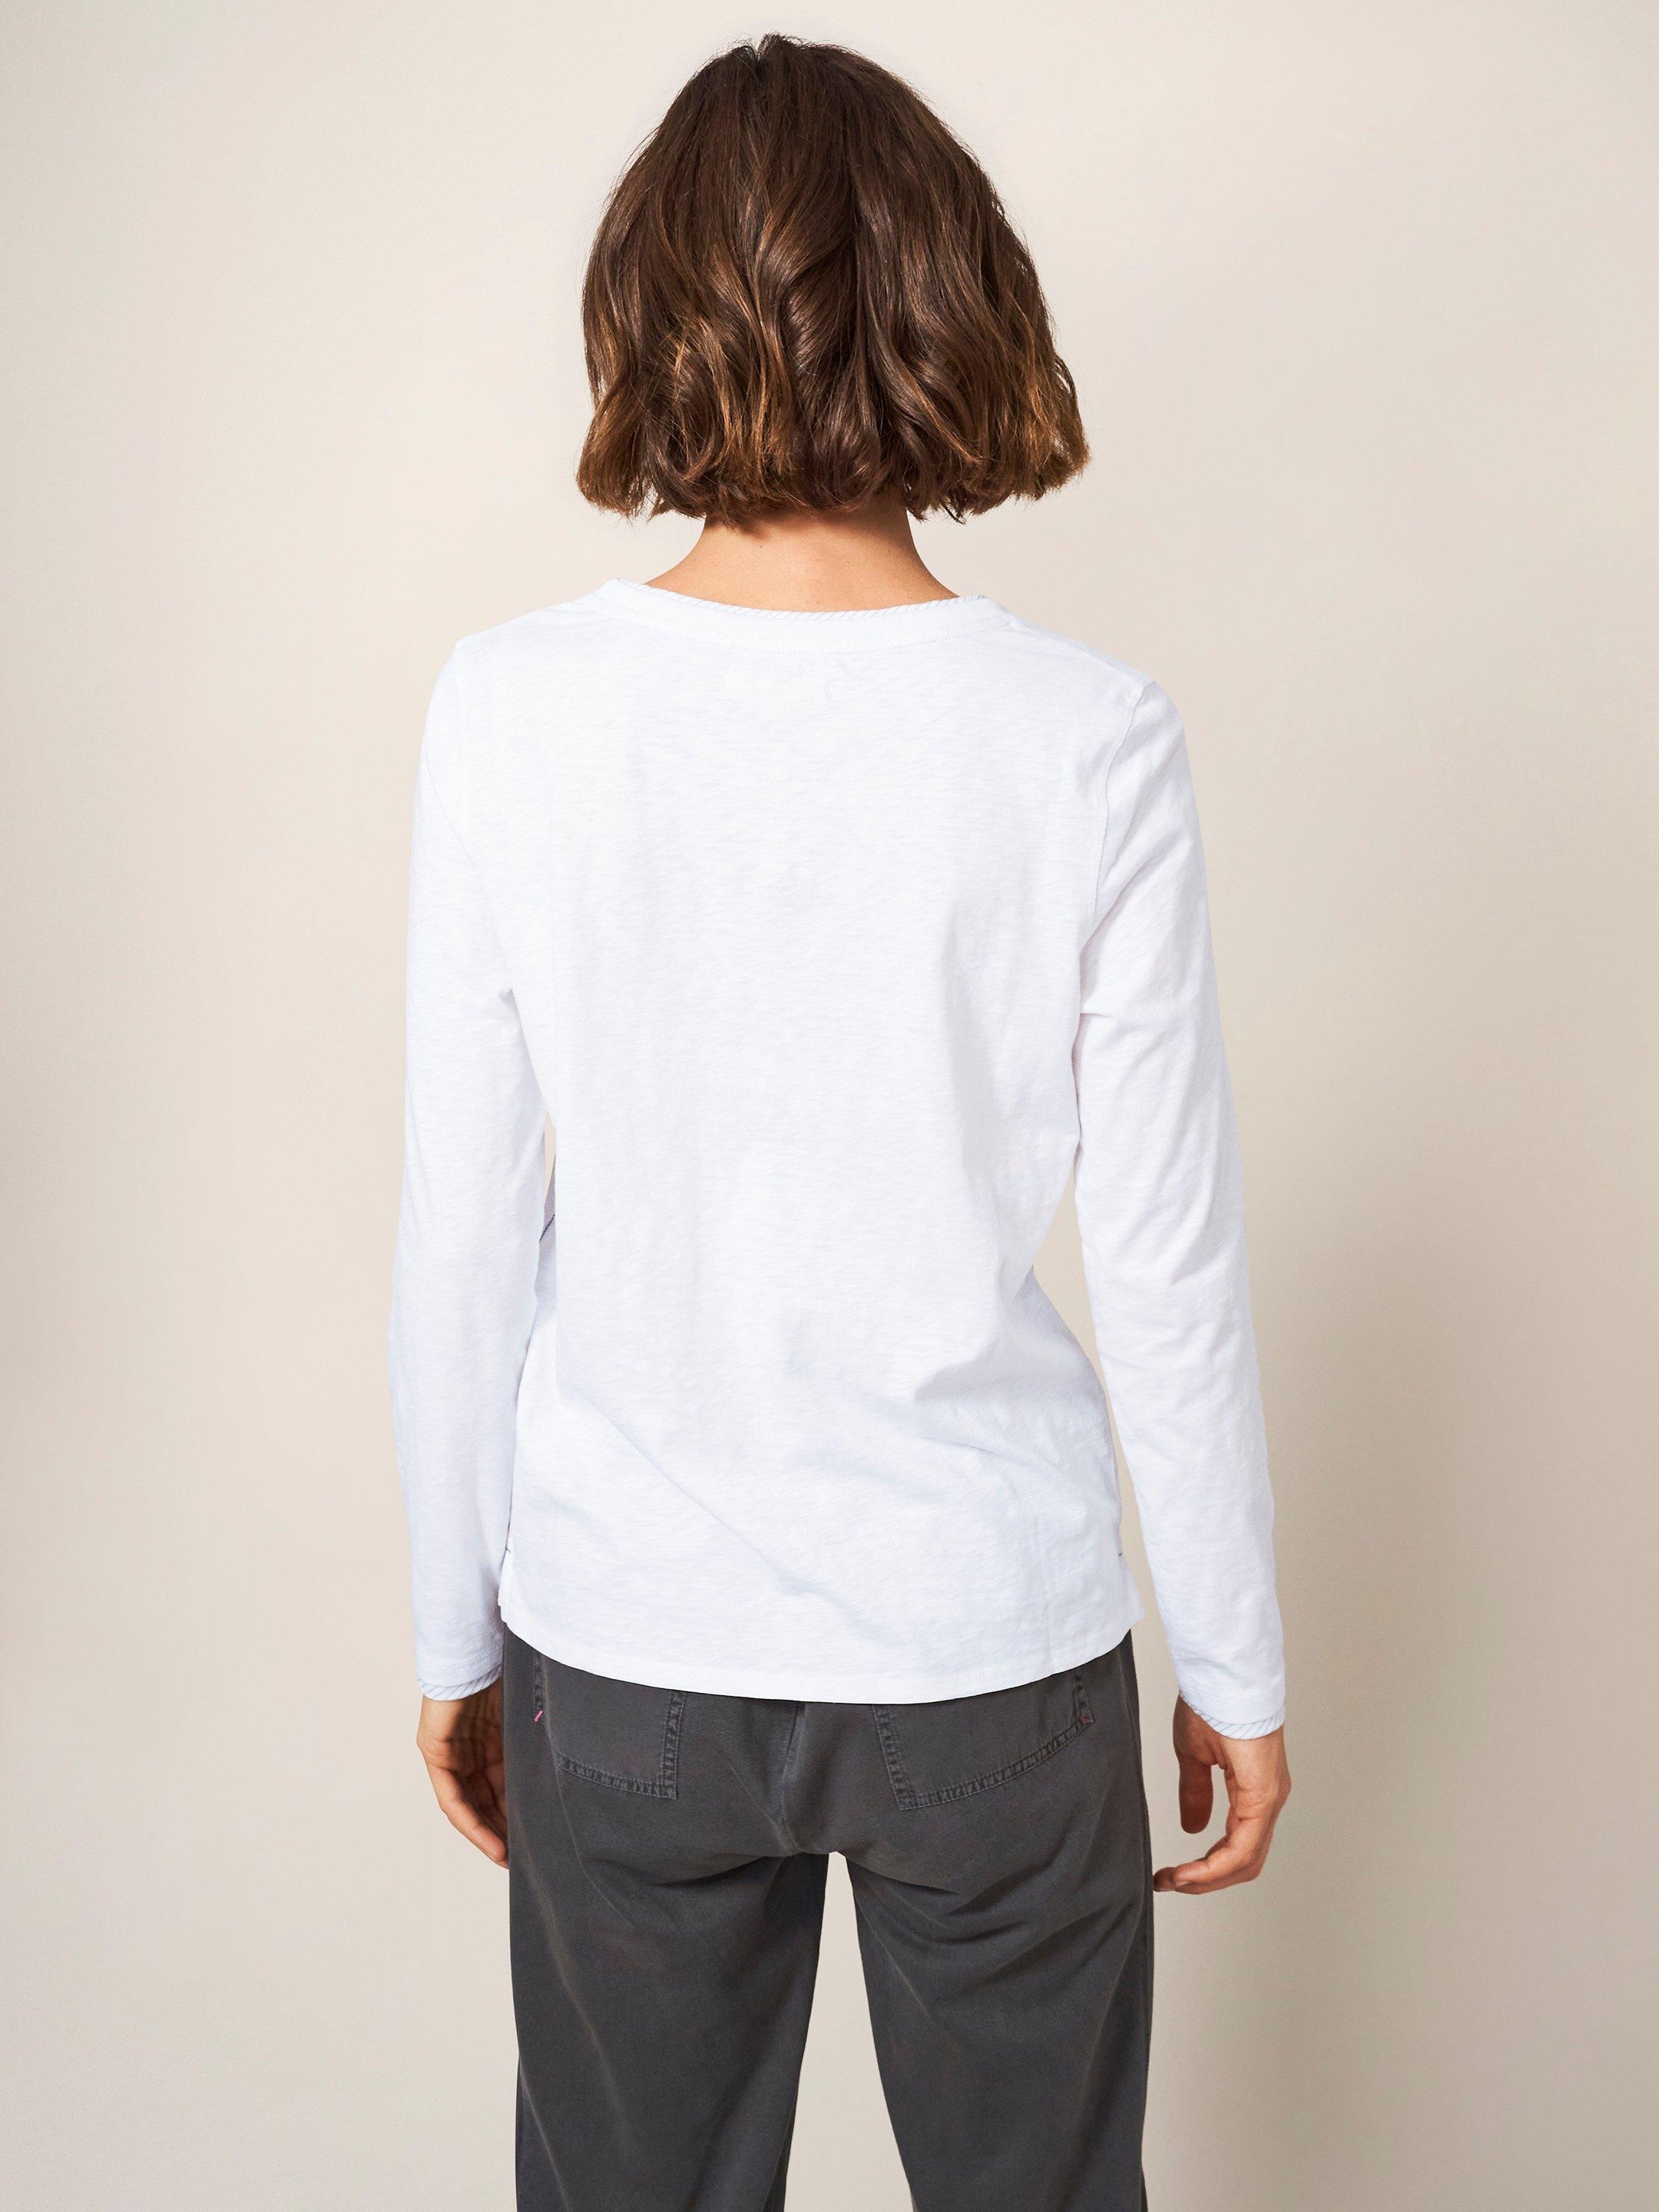 ANNABEL LS TEE in BRIL WHITE - MODEL BACK